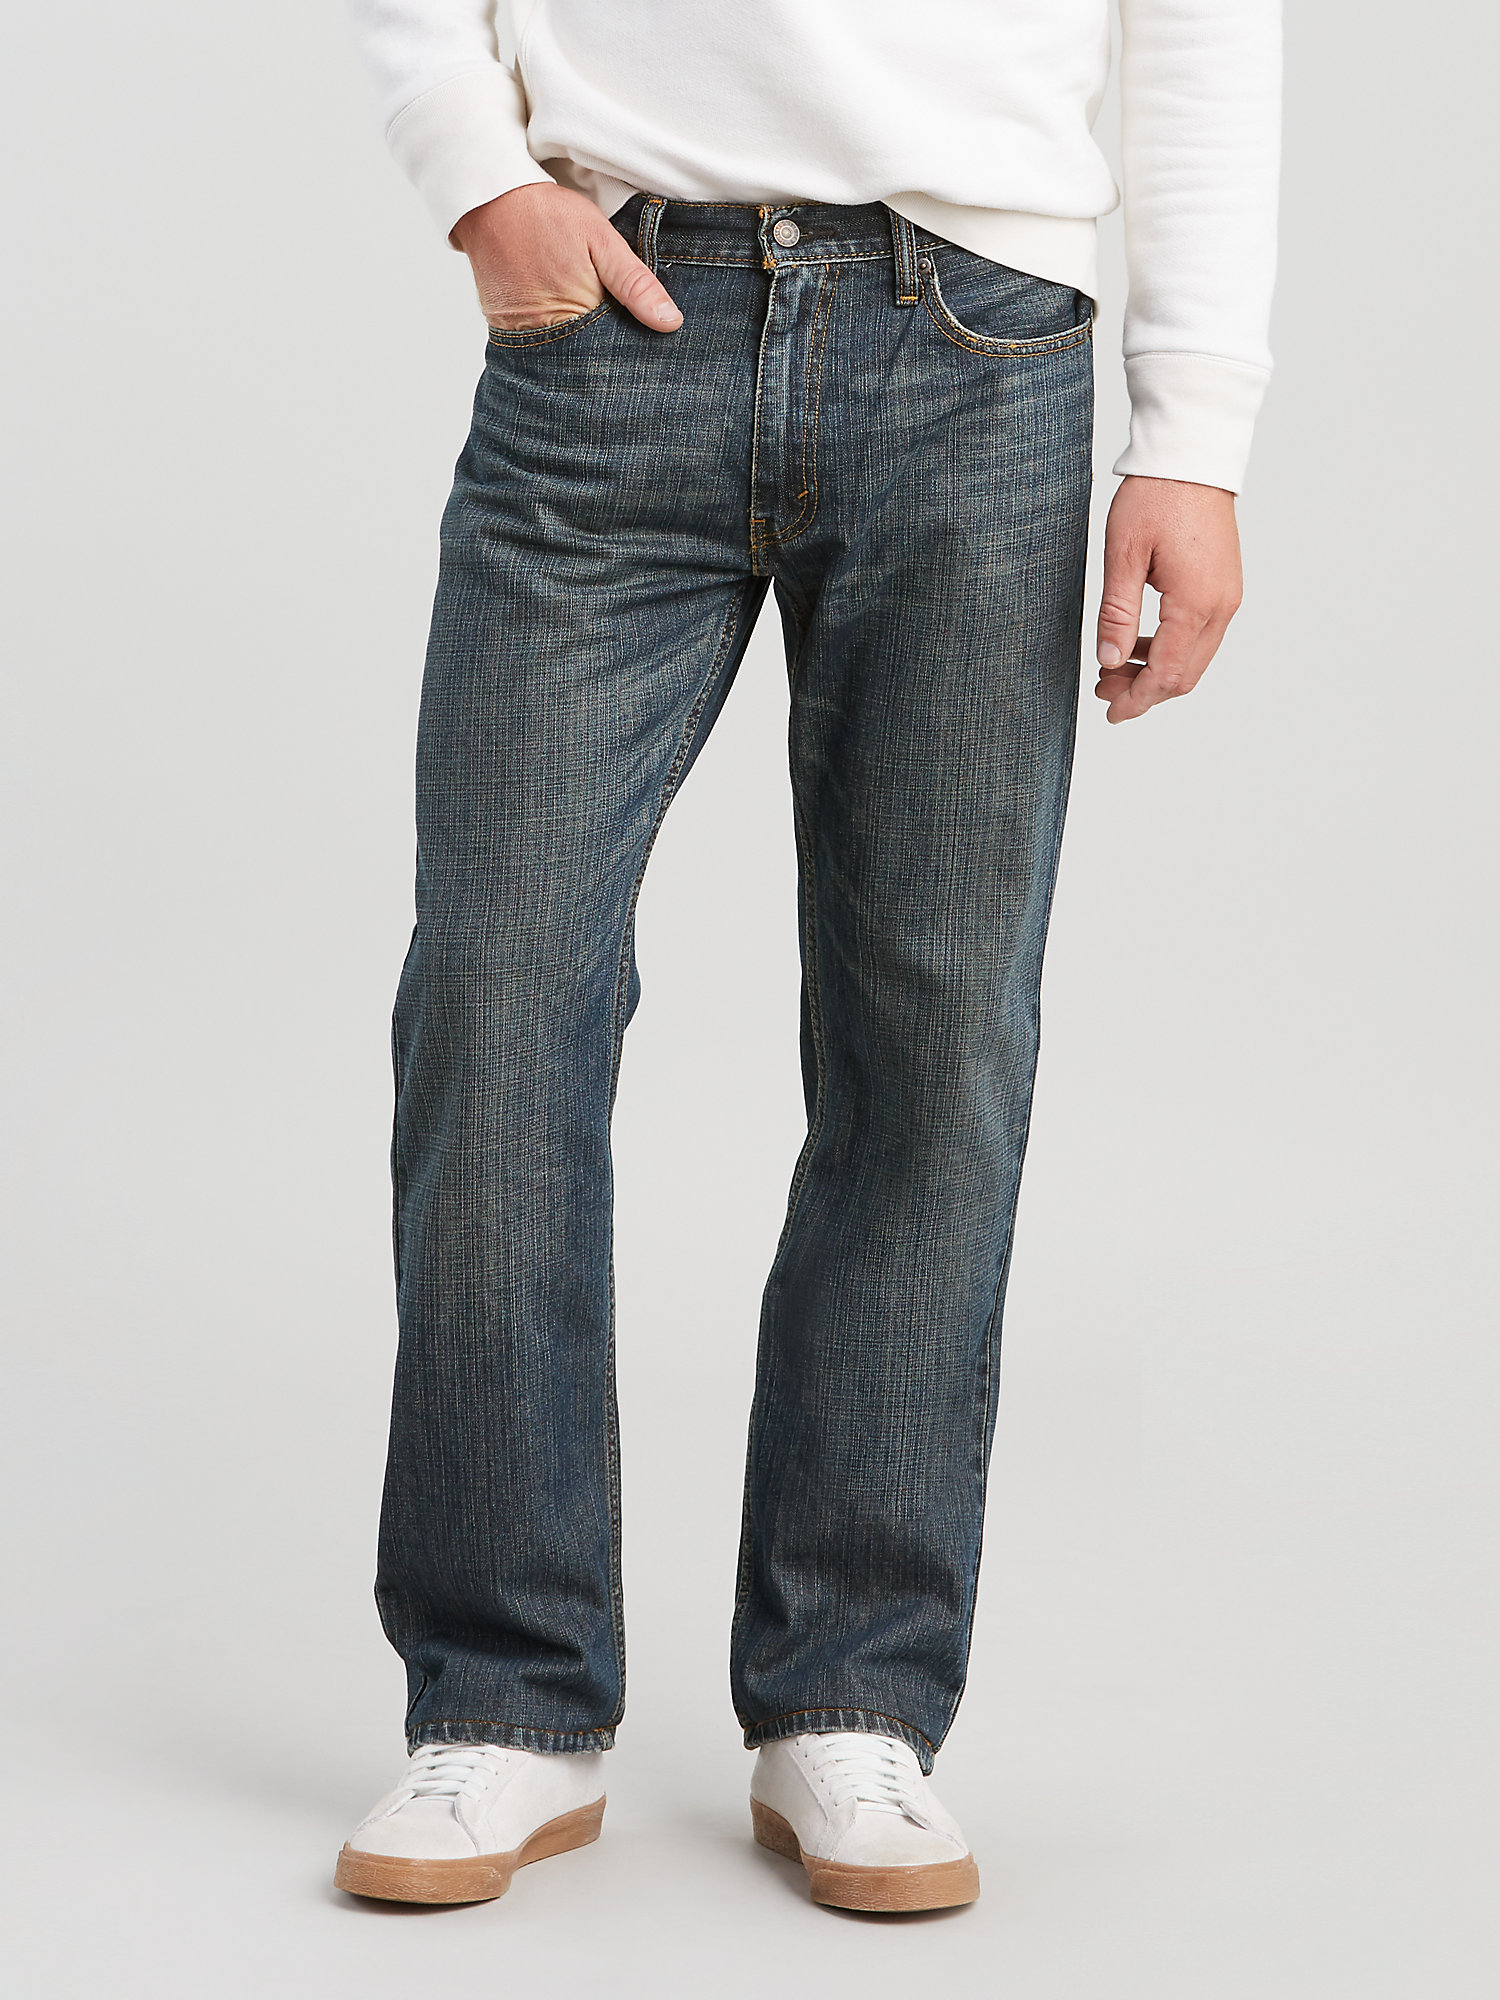 Levi's Men's 559 Relaxed Straight Fit Jeans - image 1 of 7